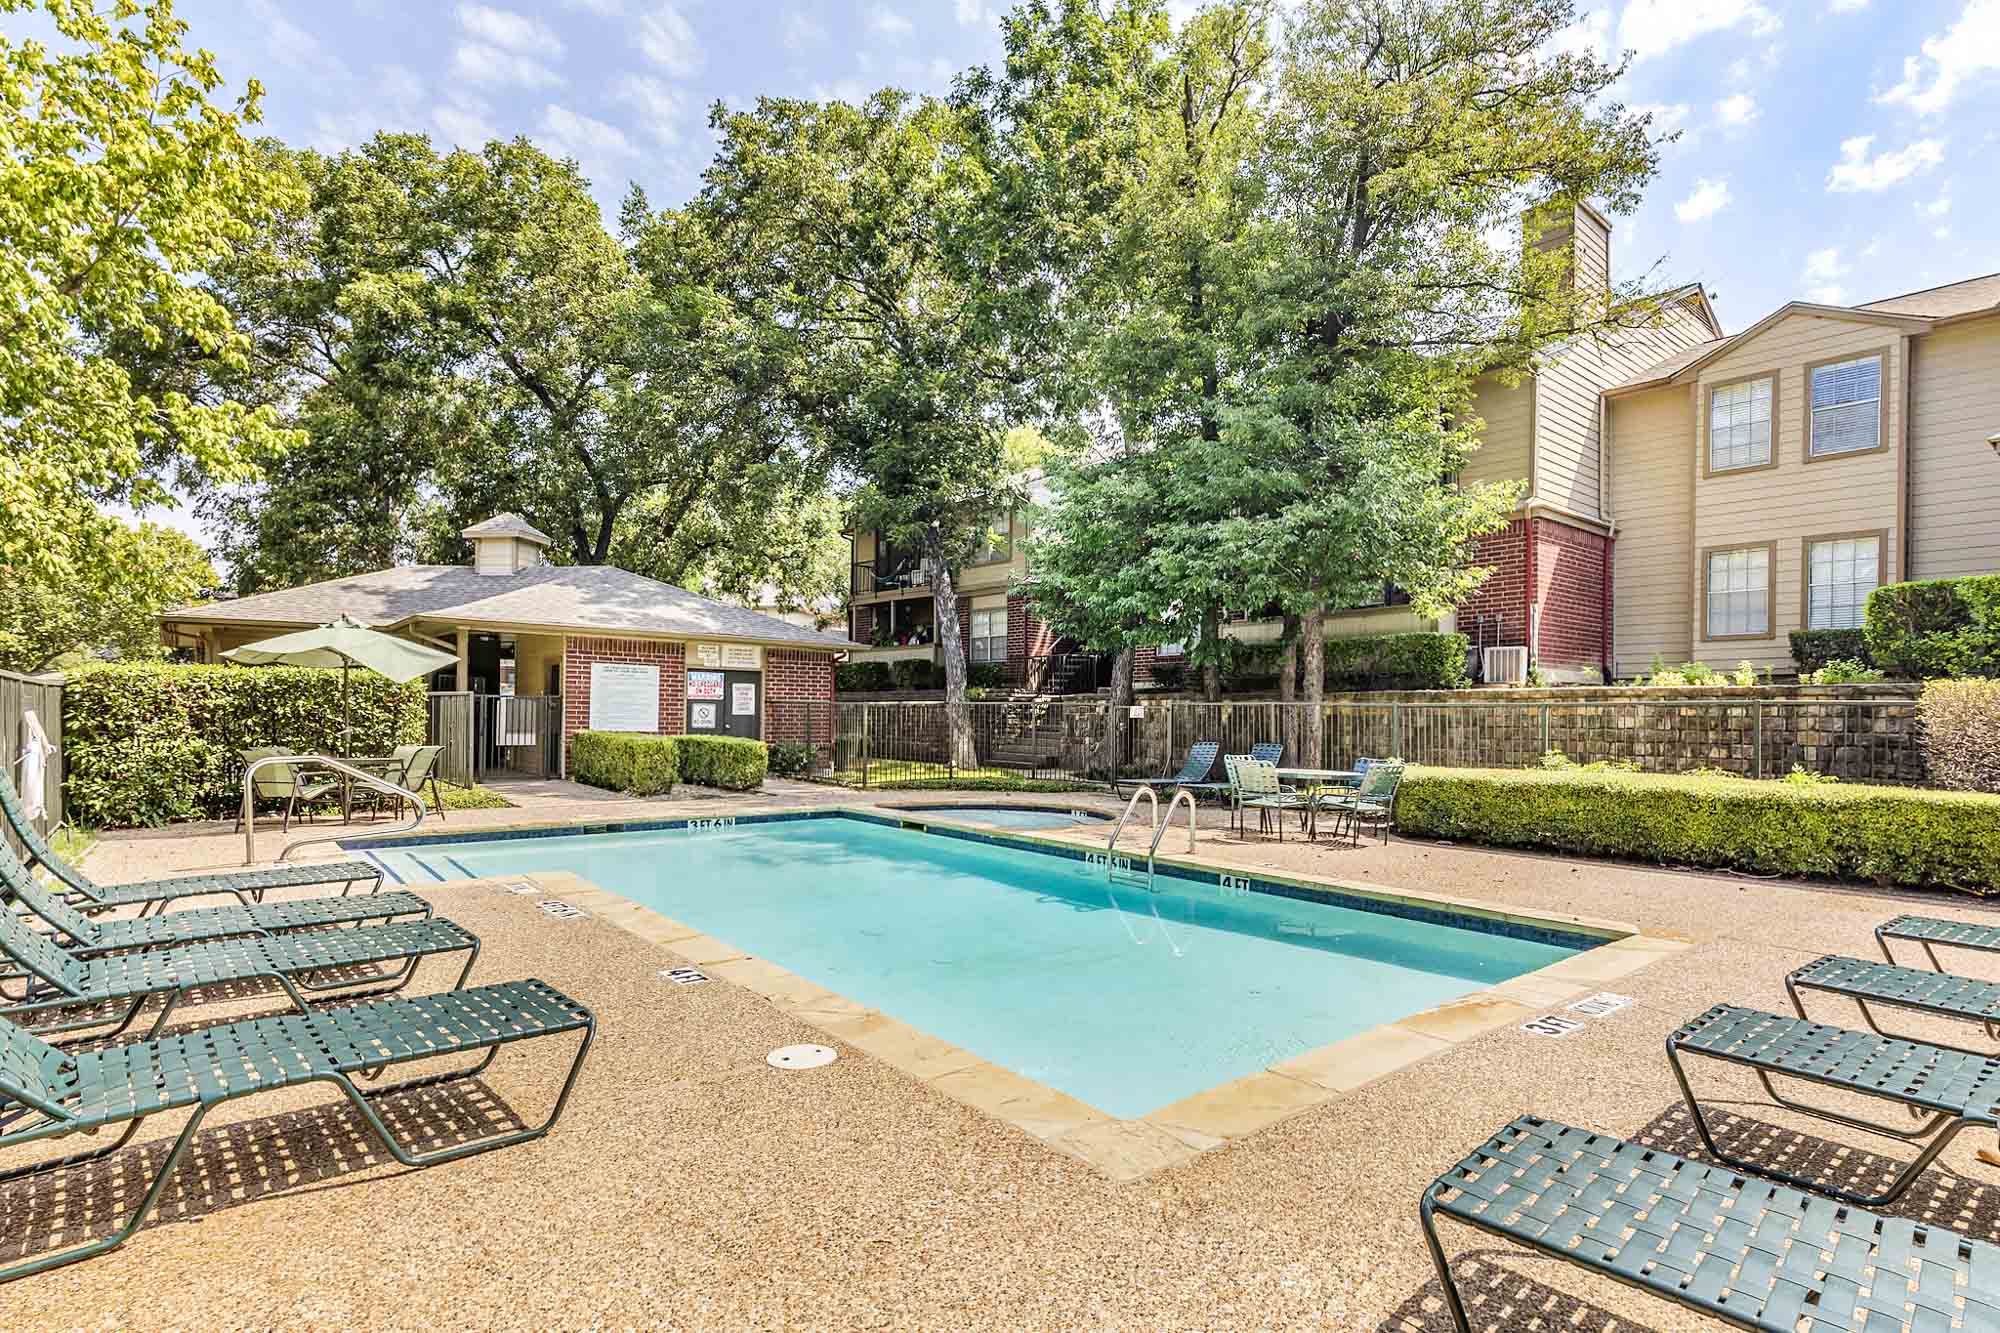 The pool at The Gables of McKinney apartments near Dallas, Texas.